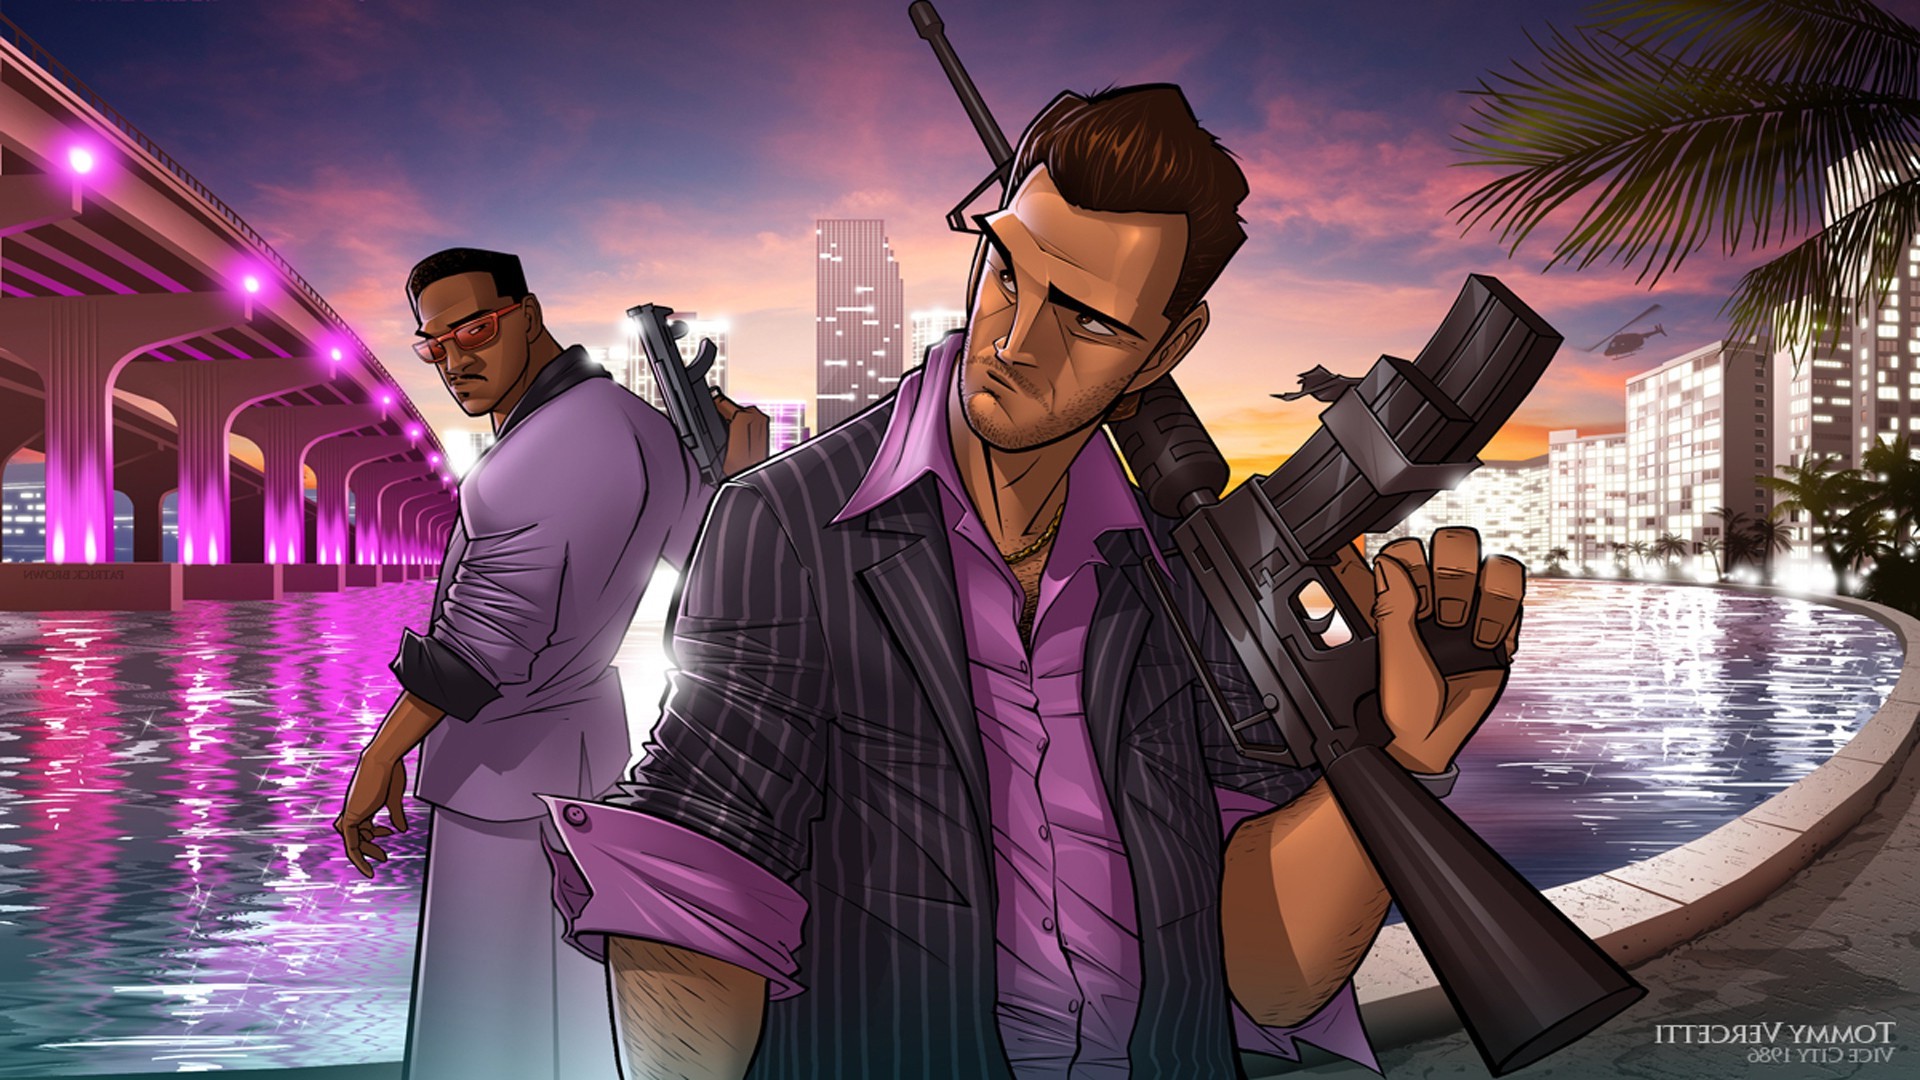 Grand Theft Auto Vice City, PC Gaming, Tommy Vercetti, Lance Vance Wallpaper HD / Desktop and Mobile Background